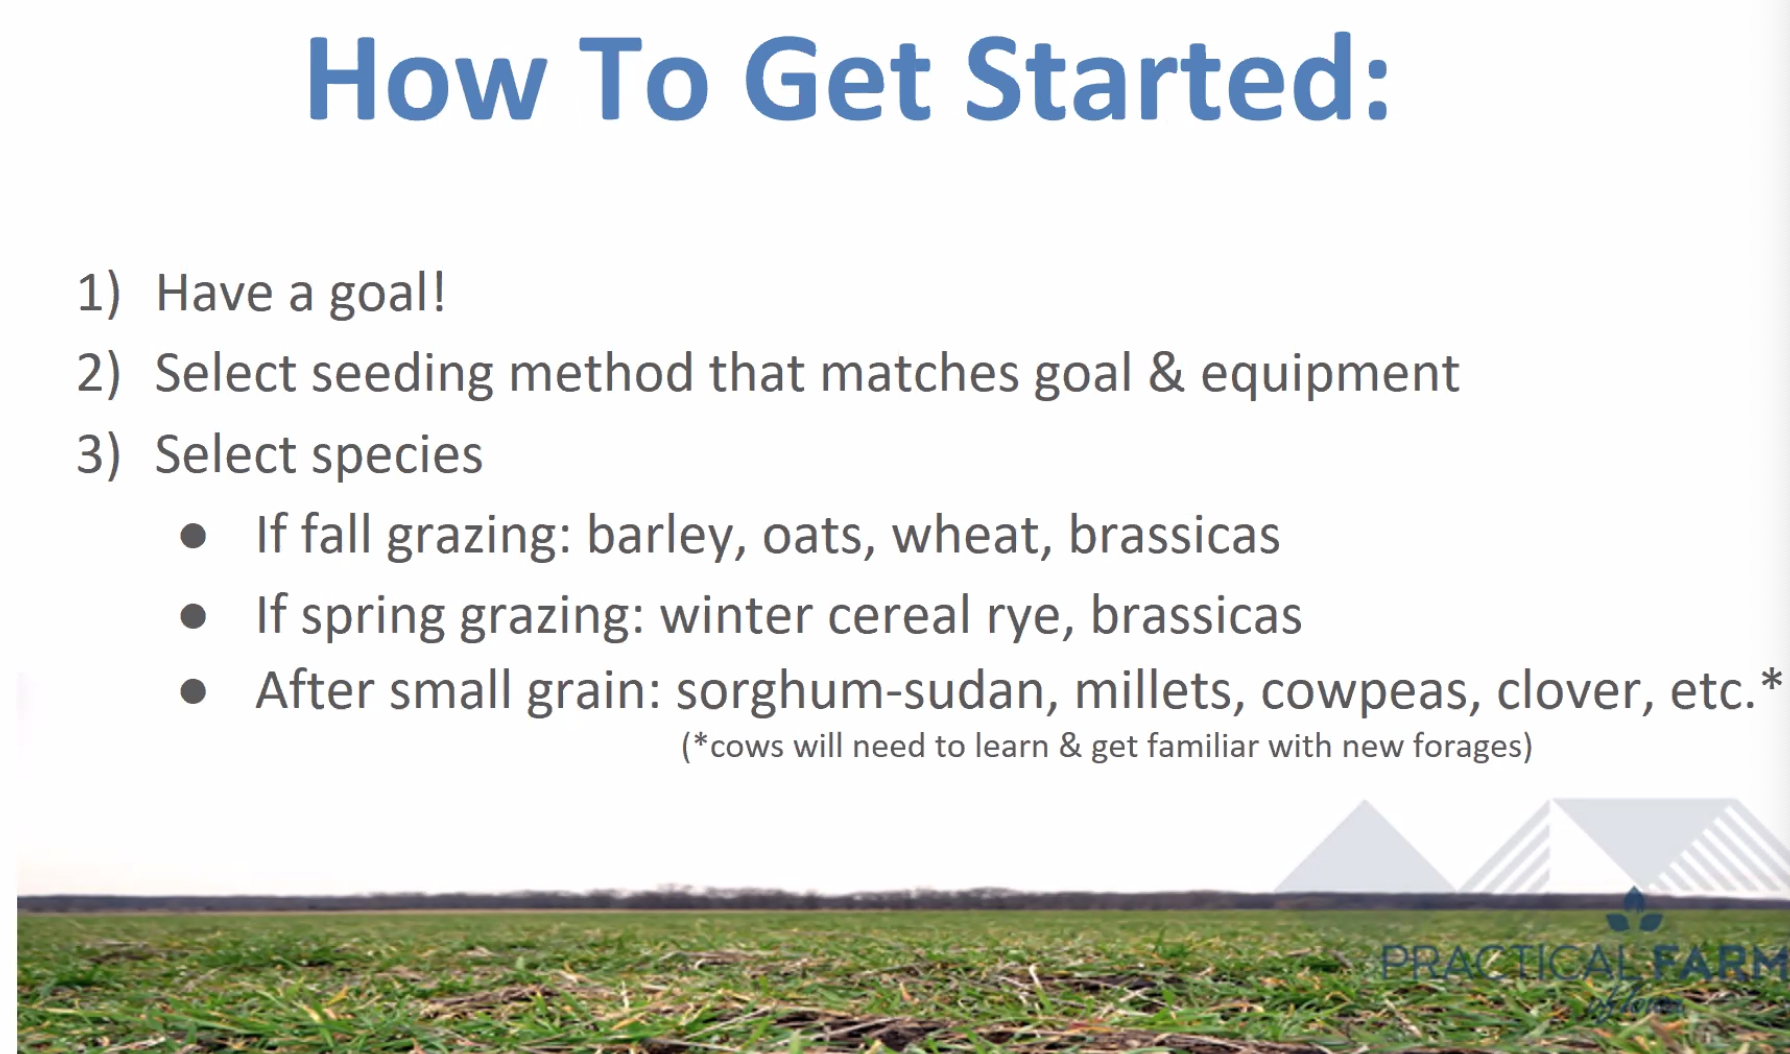 How to get started grazing cover crops.